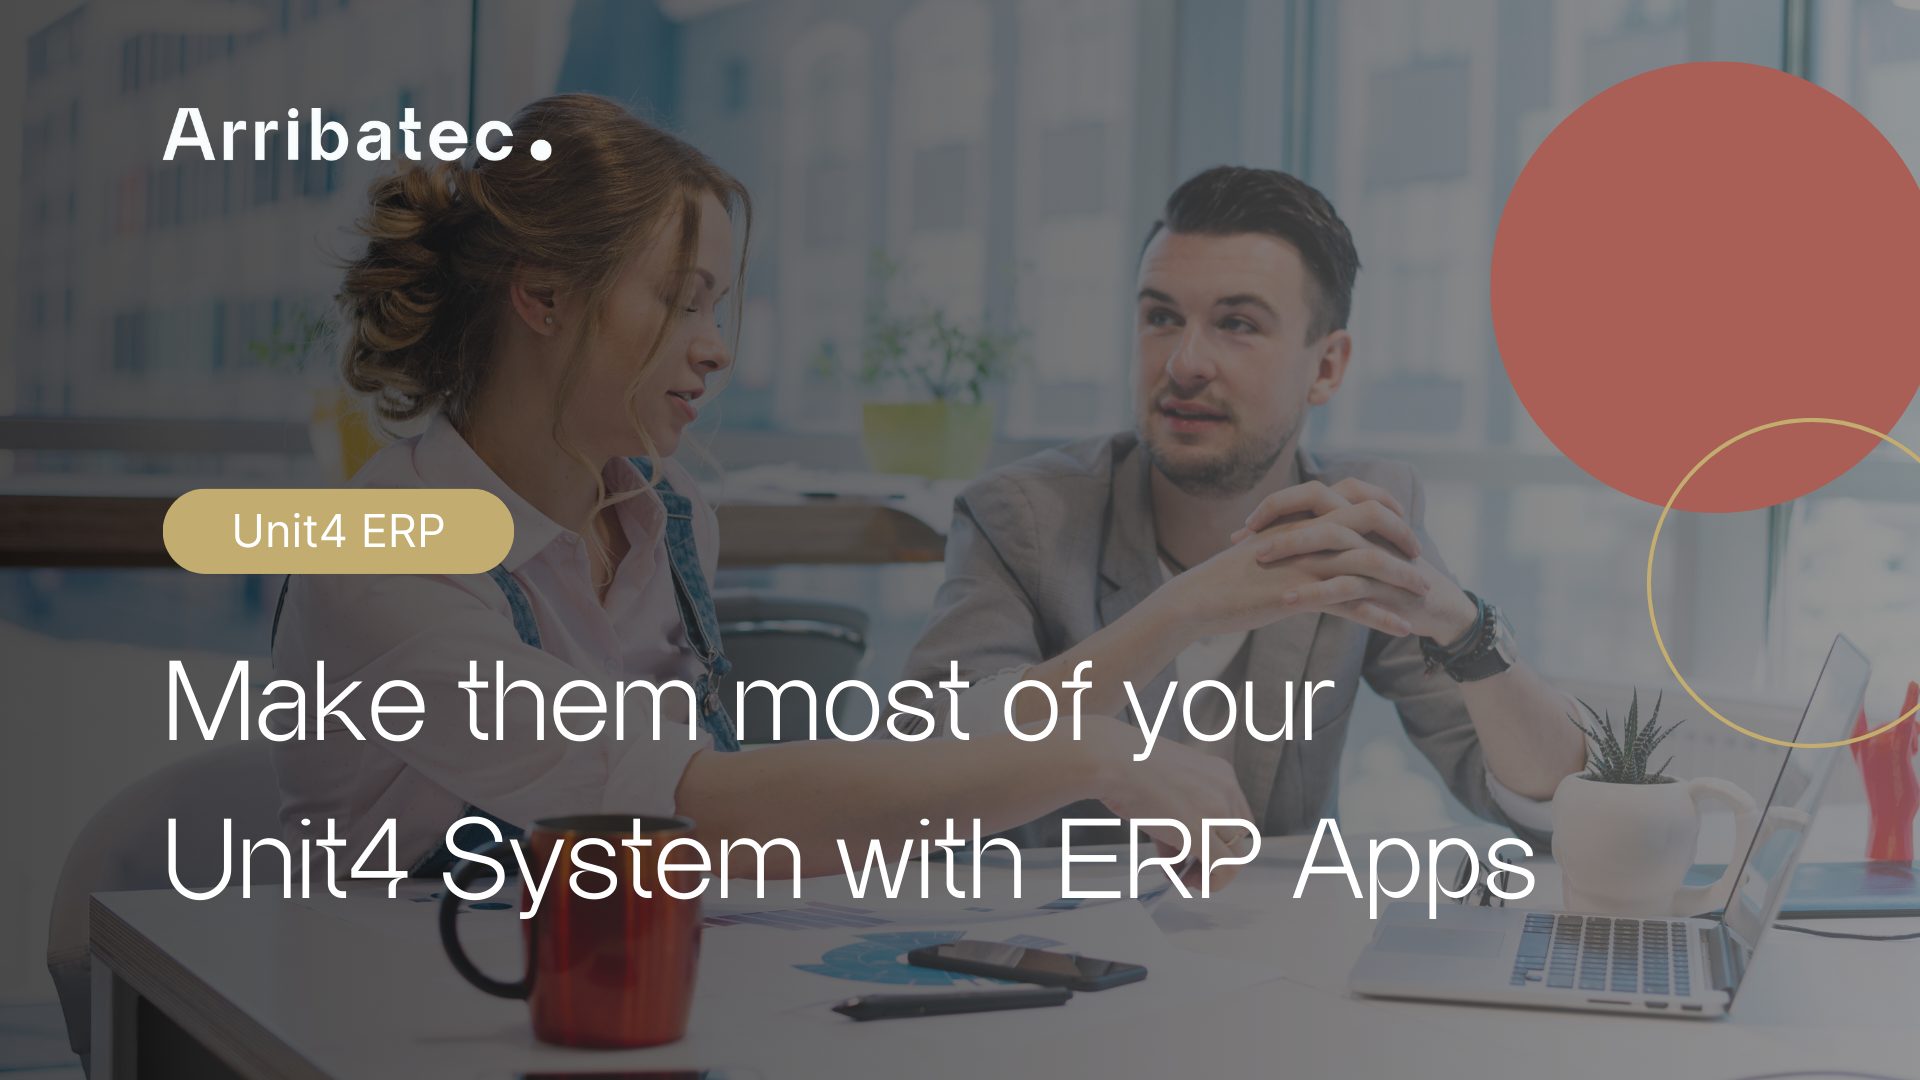 Unit4 ERP Milestone 7 is designed to help your business manage its people, projects and assets more efficiently than ever before.